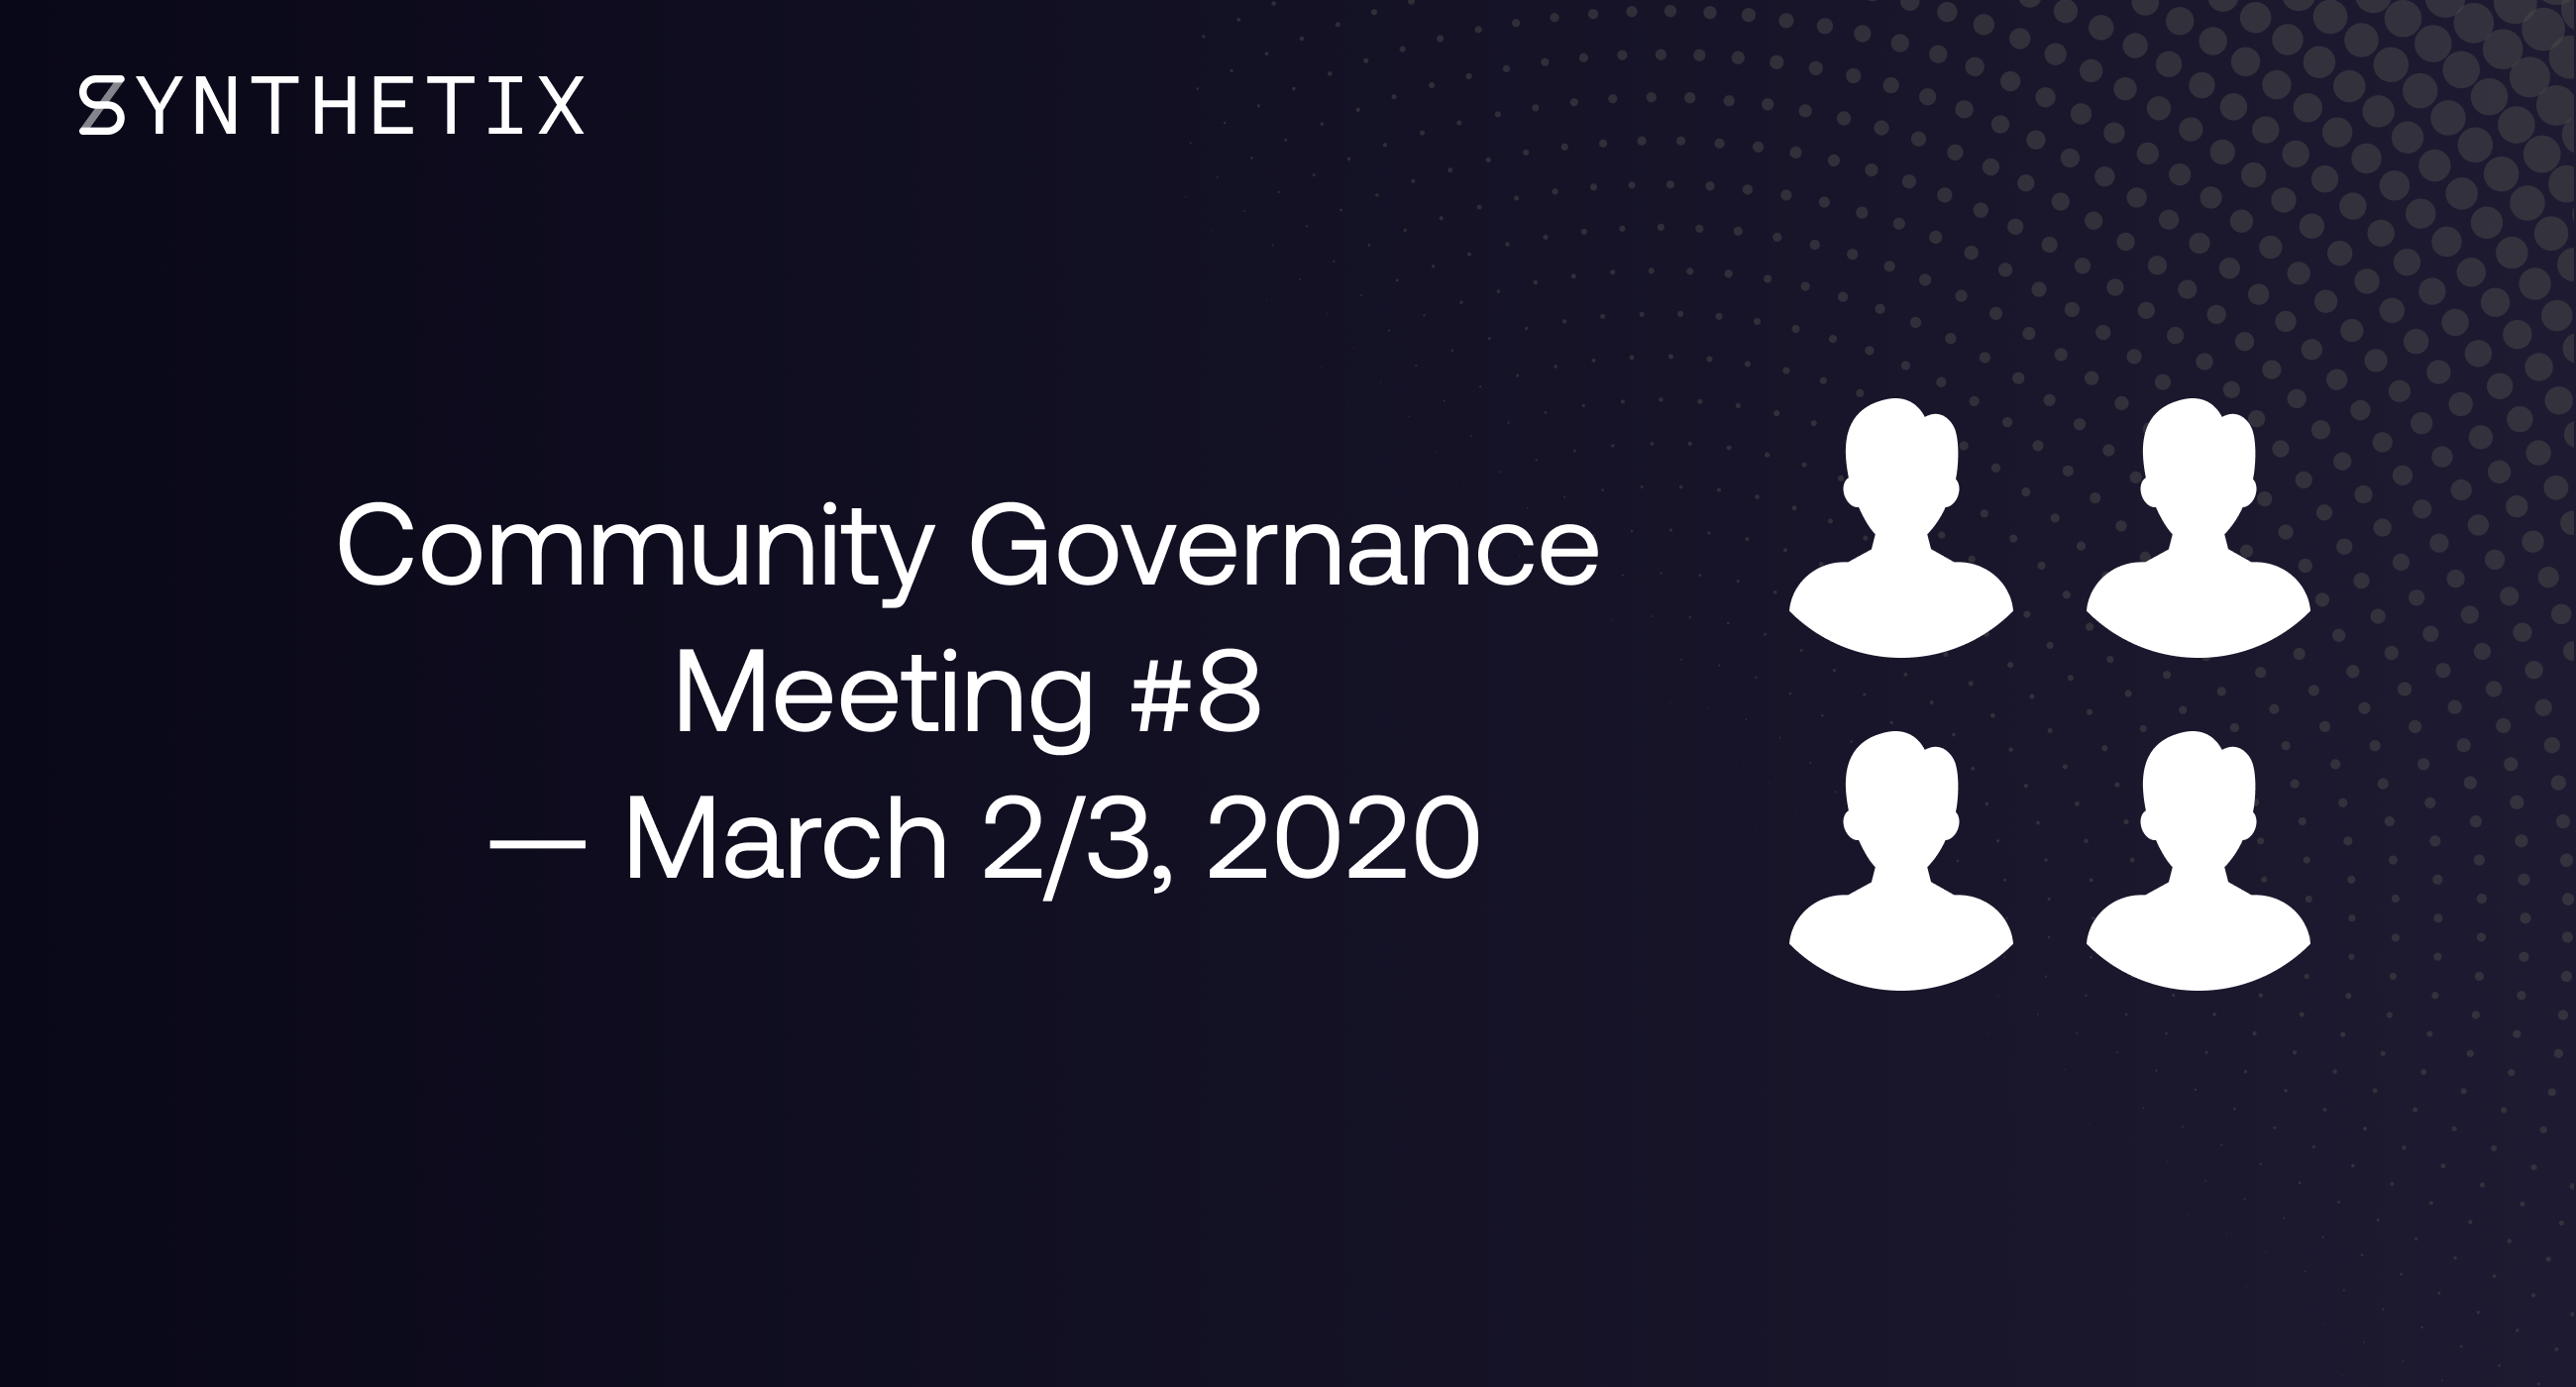 Join us on March 2/3 for the next community governance call!